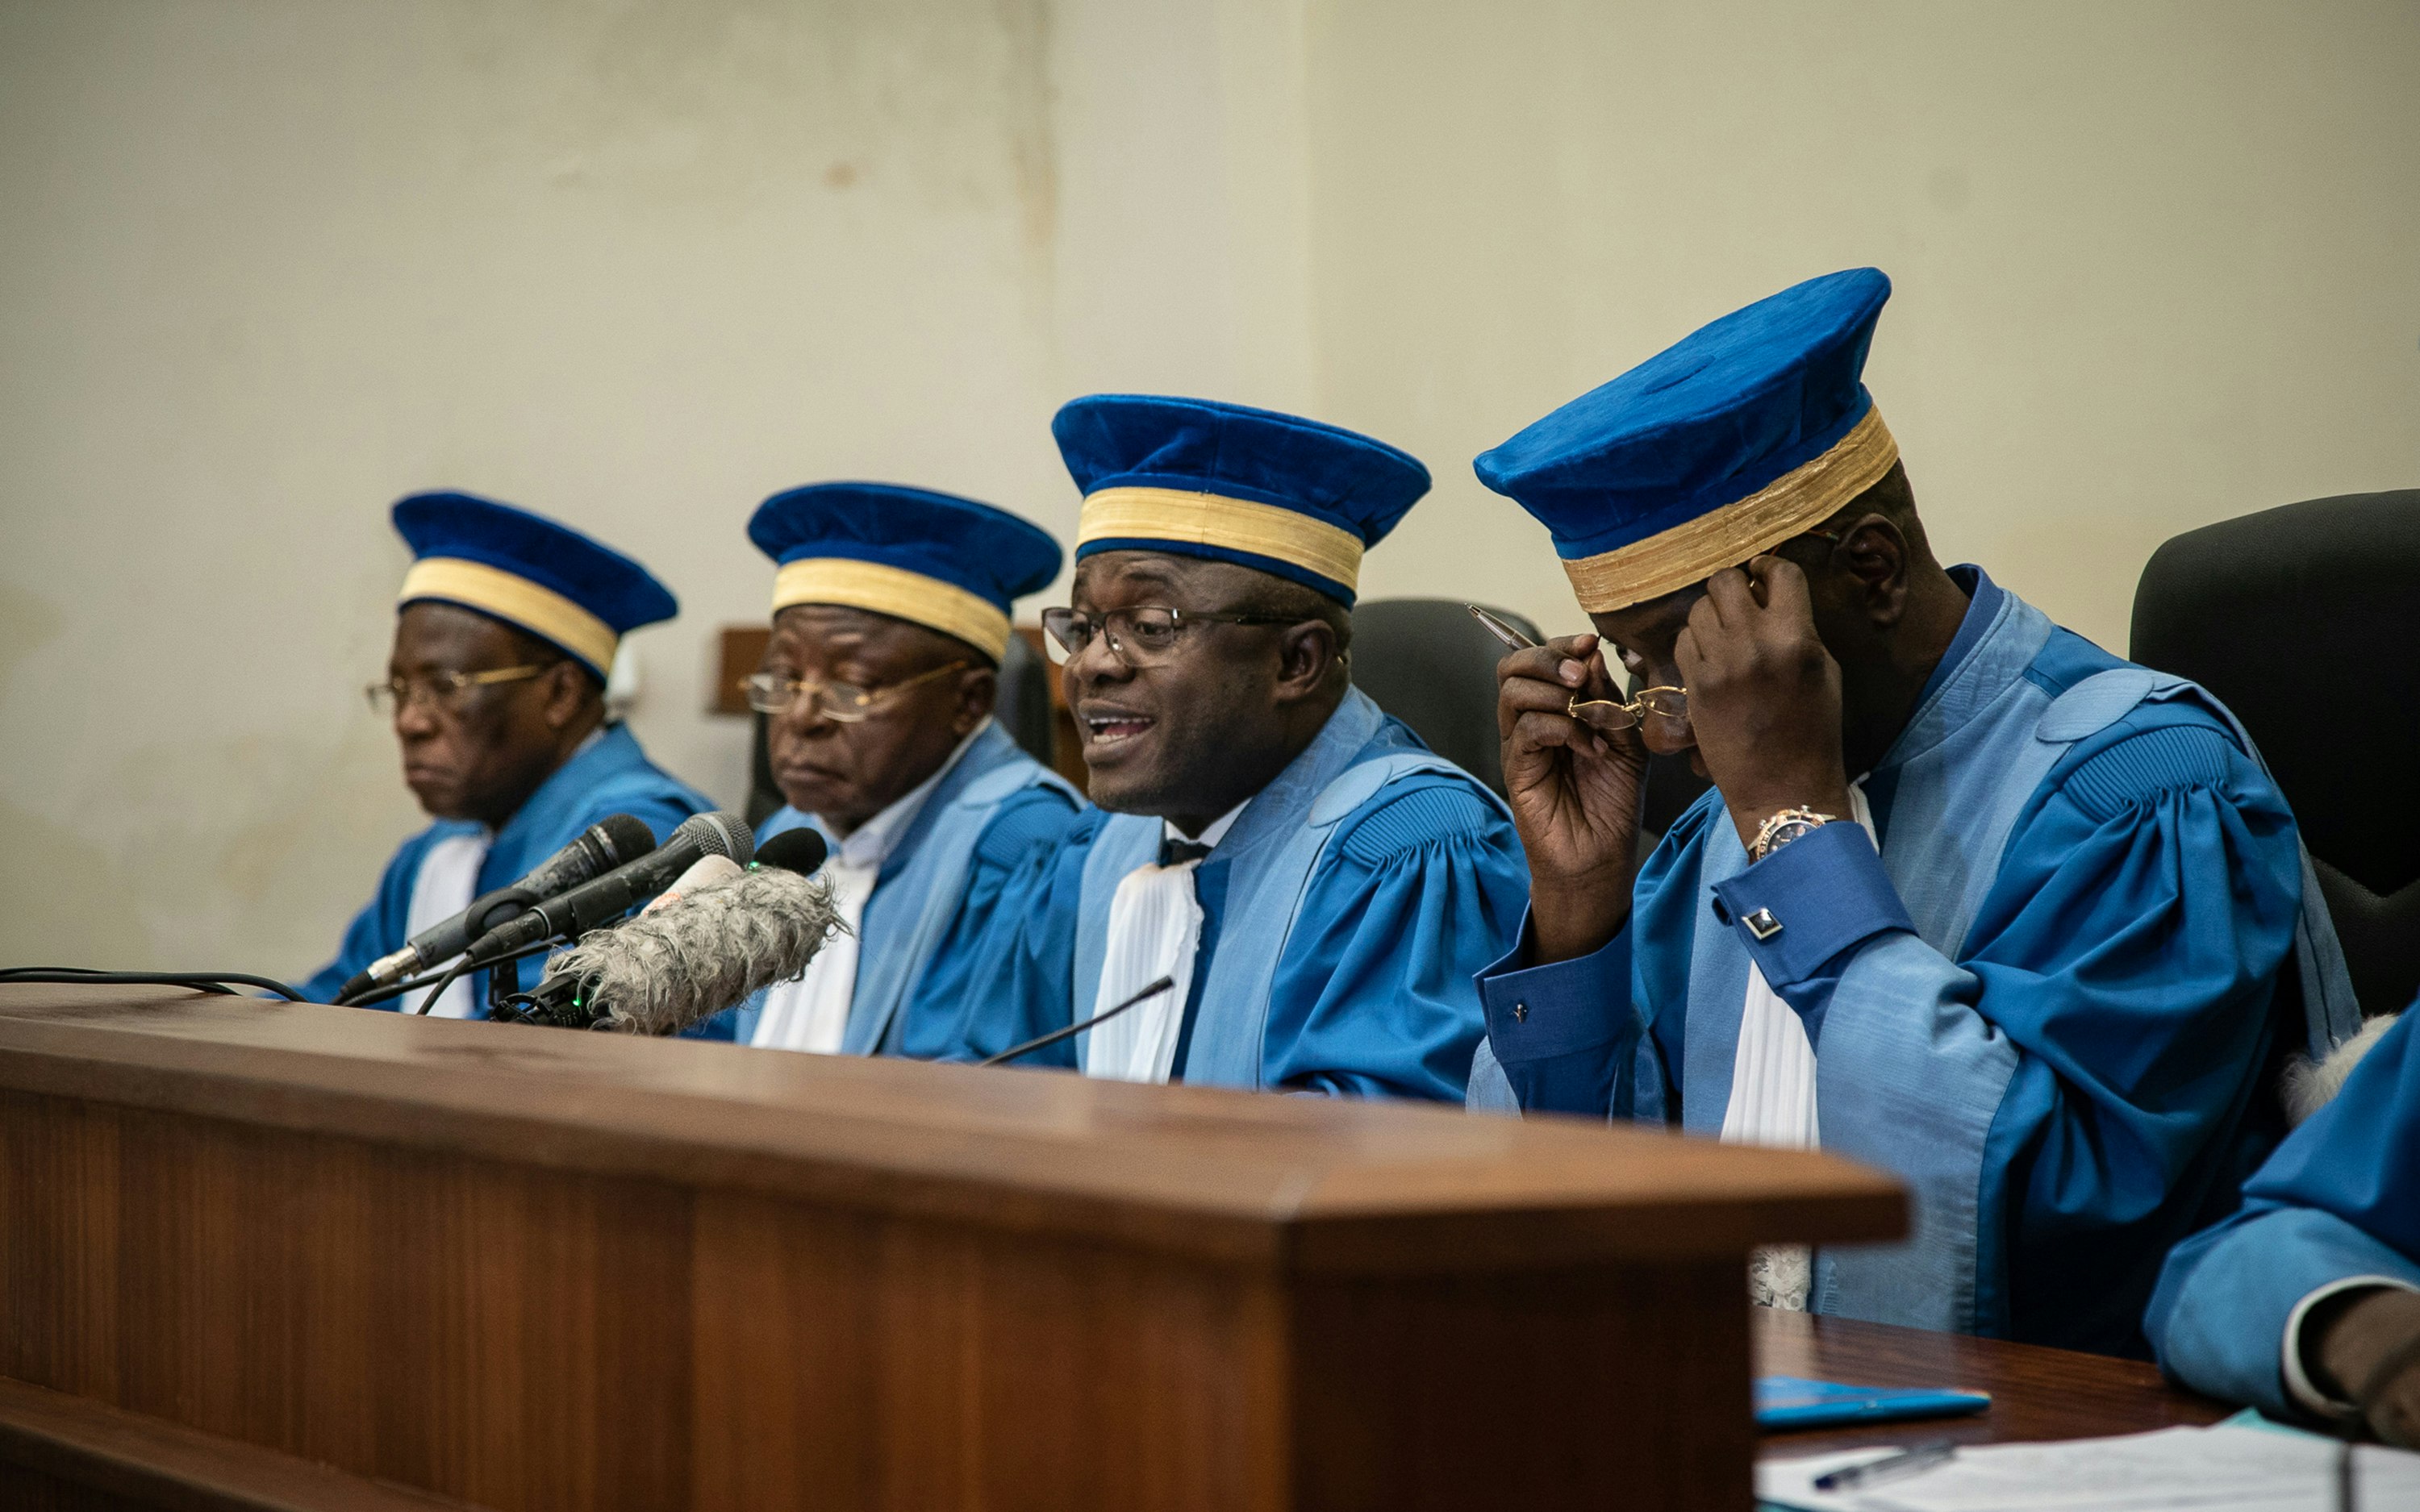 Judges wearing blue caps and robes sit atop a bench in a courtroom